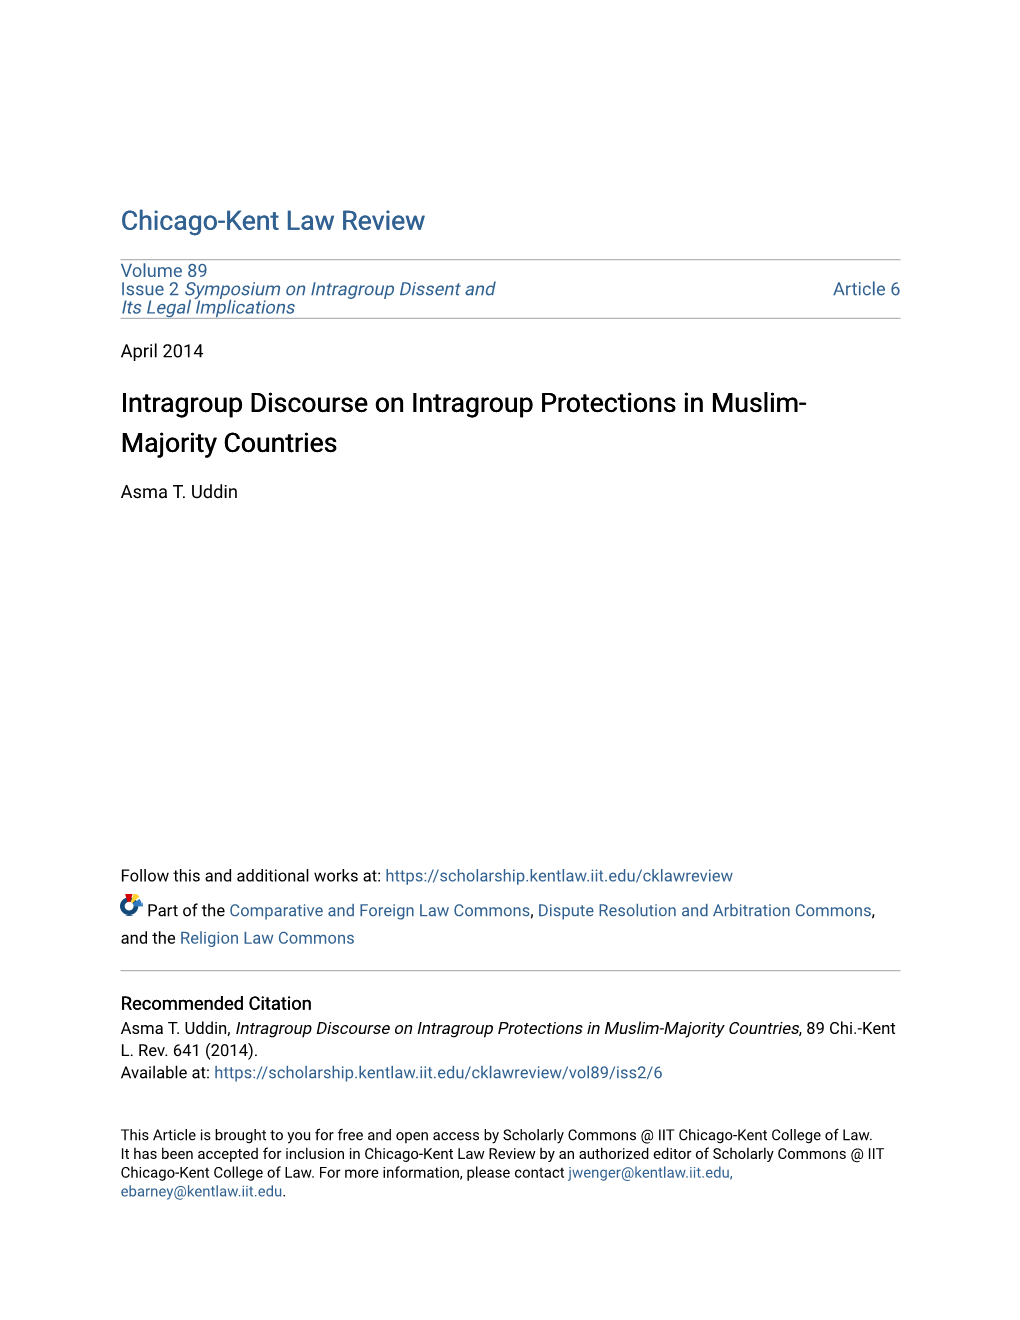 Intragroup Discourse on Intragroup Protections in Muslim-Majority Countries, 89 Chi.-Kent L